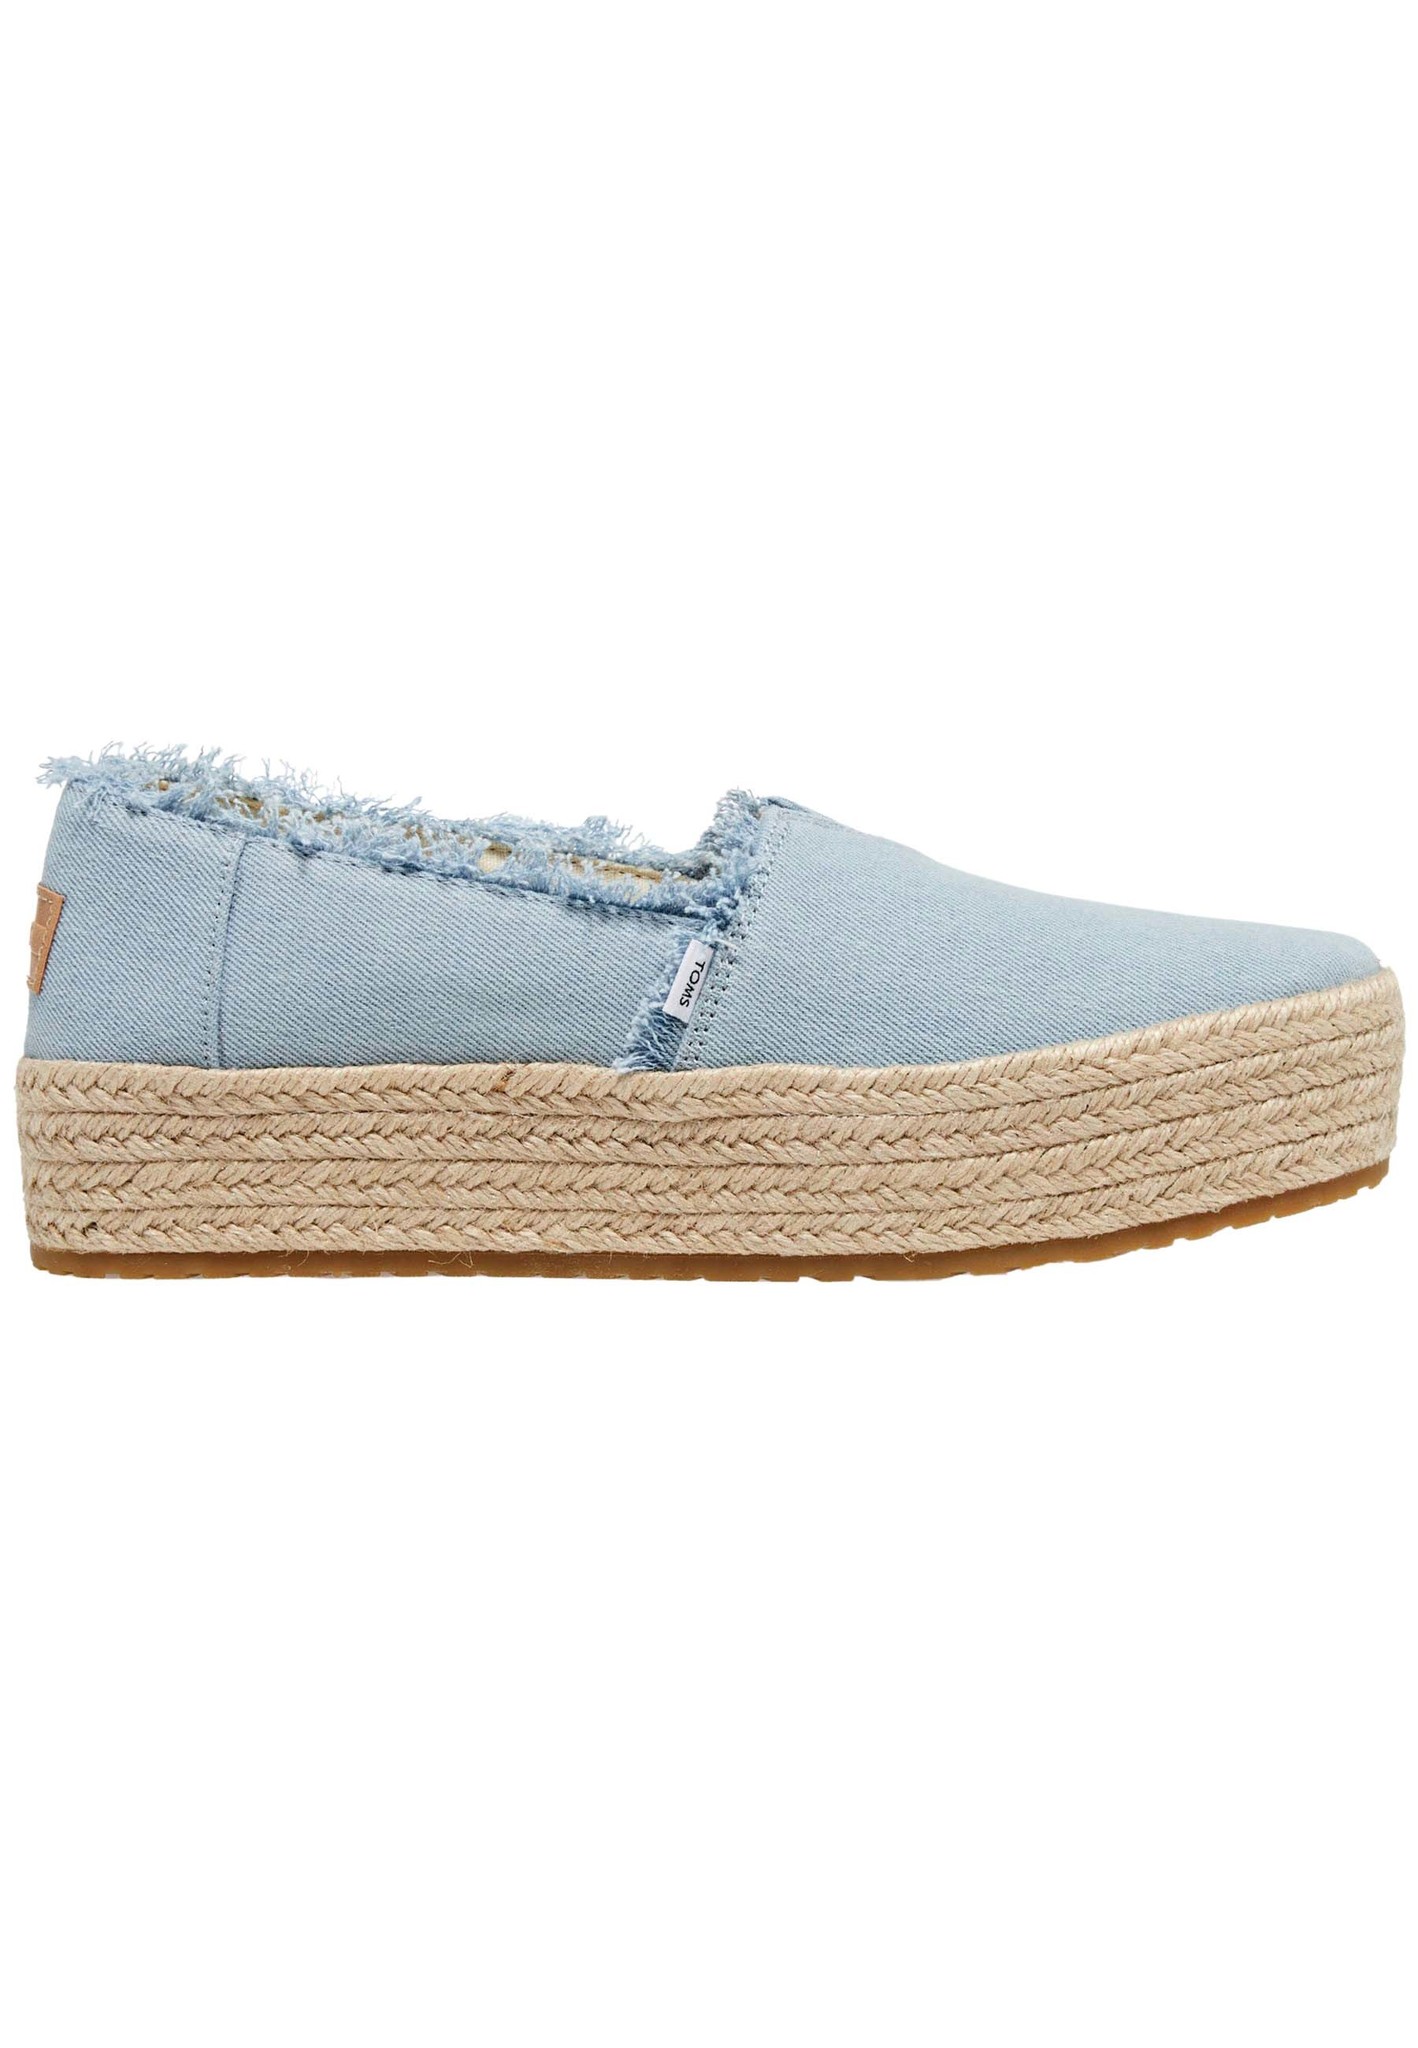 Toms loafers lichtblauw Dames maat 36